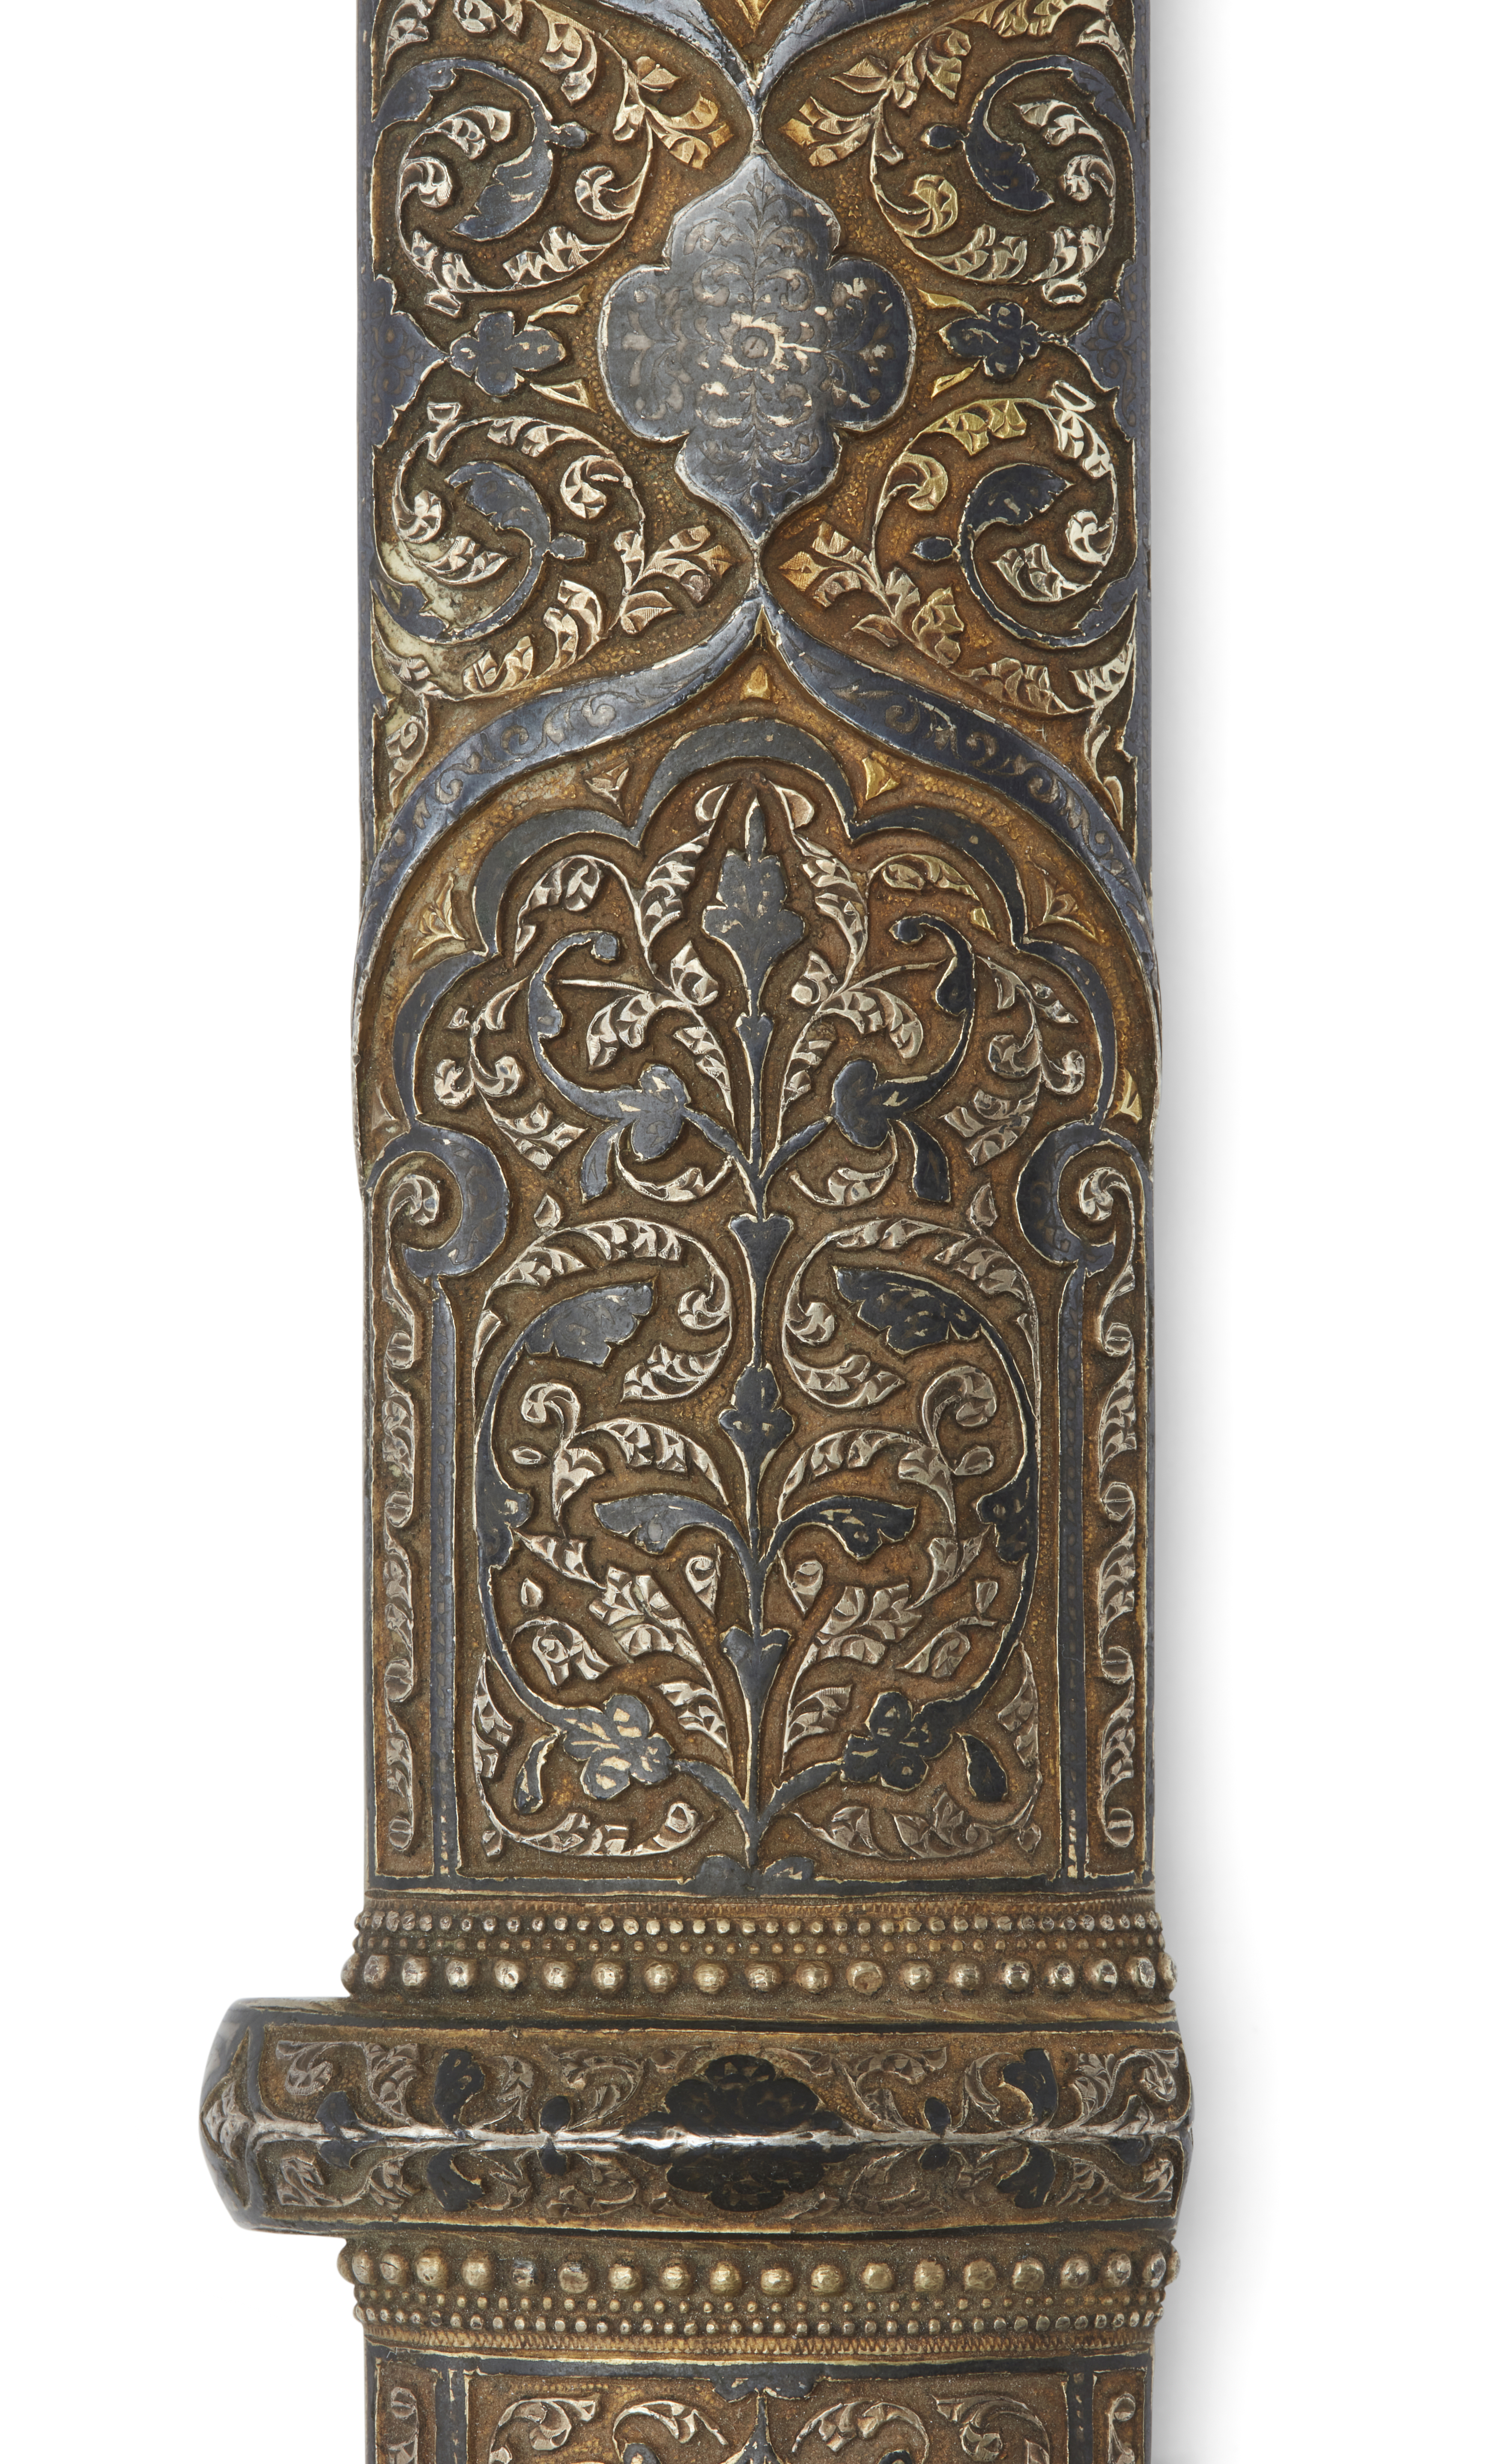 A gilt silver nielloed and gold damascened dagger (kinjal), Georgia or Daghestan, Dated 1324AH/1... - Image 3 of 4